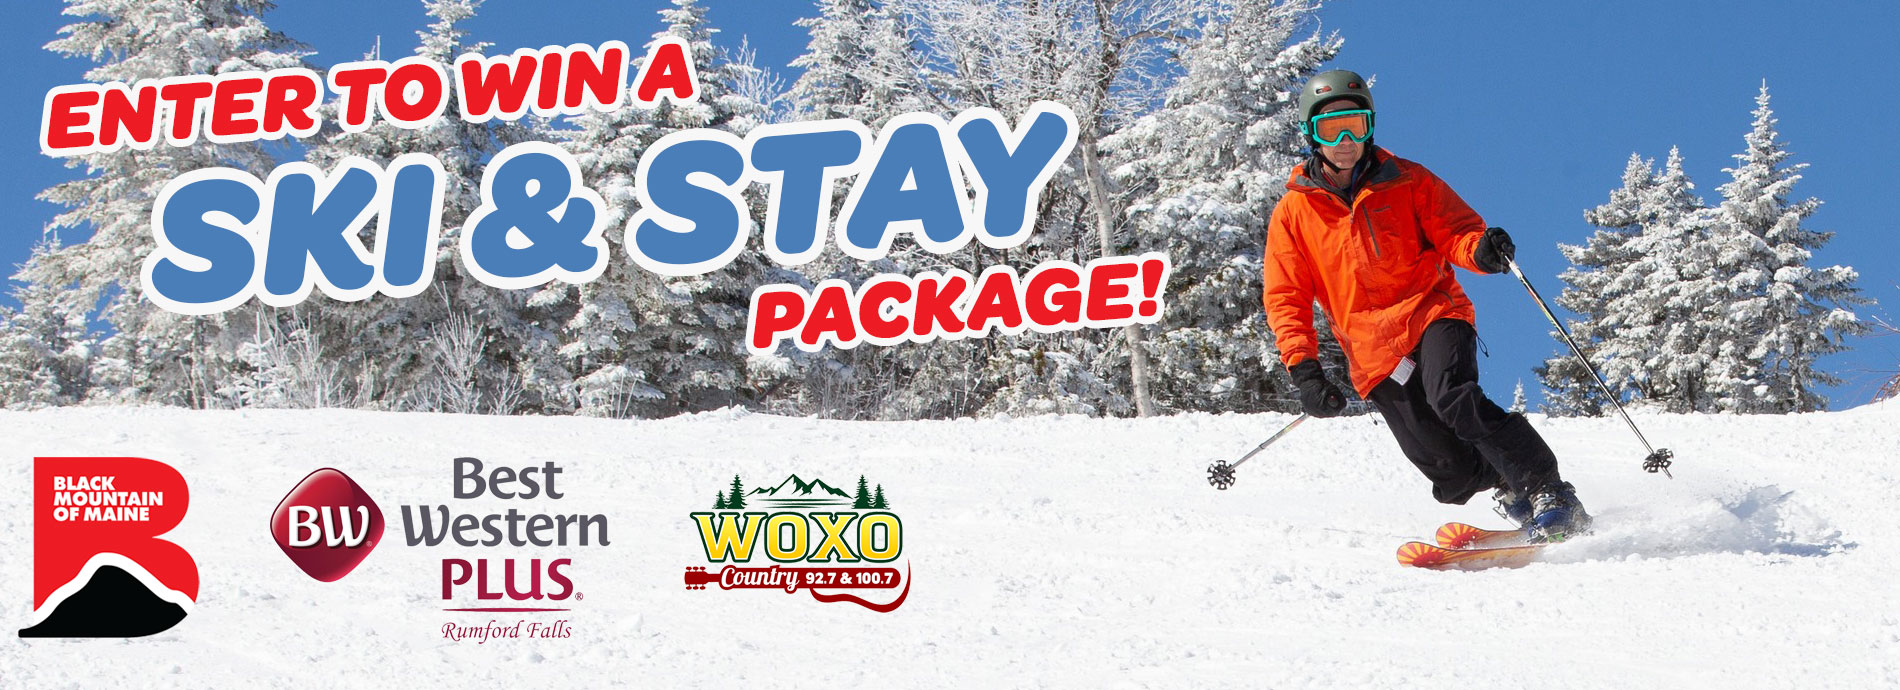 Enter to Win a Ski & Stay Package with WOXO!